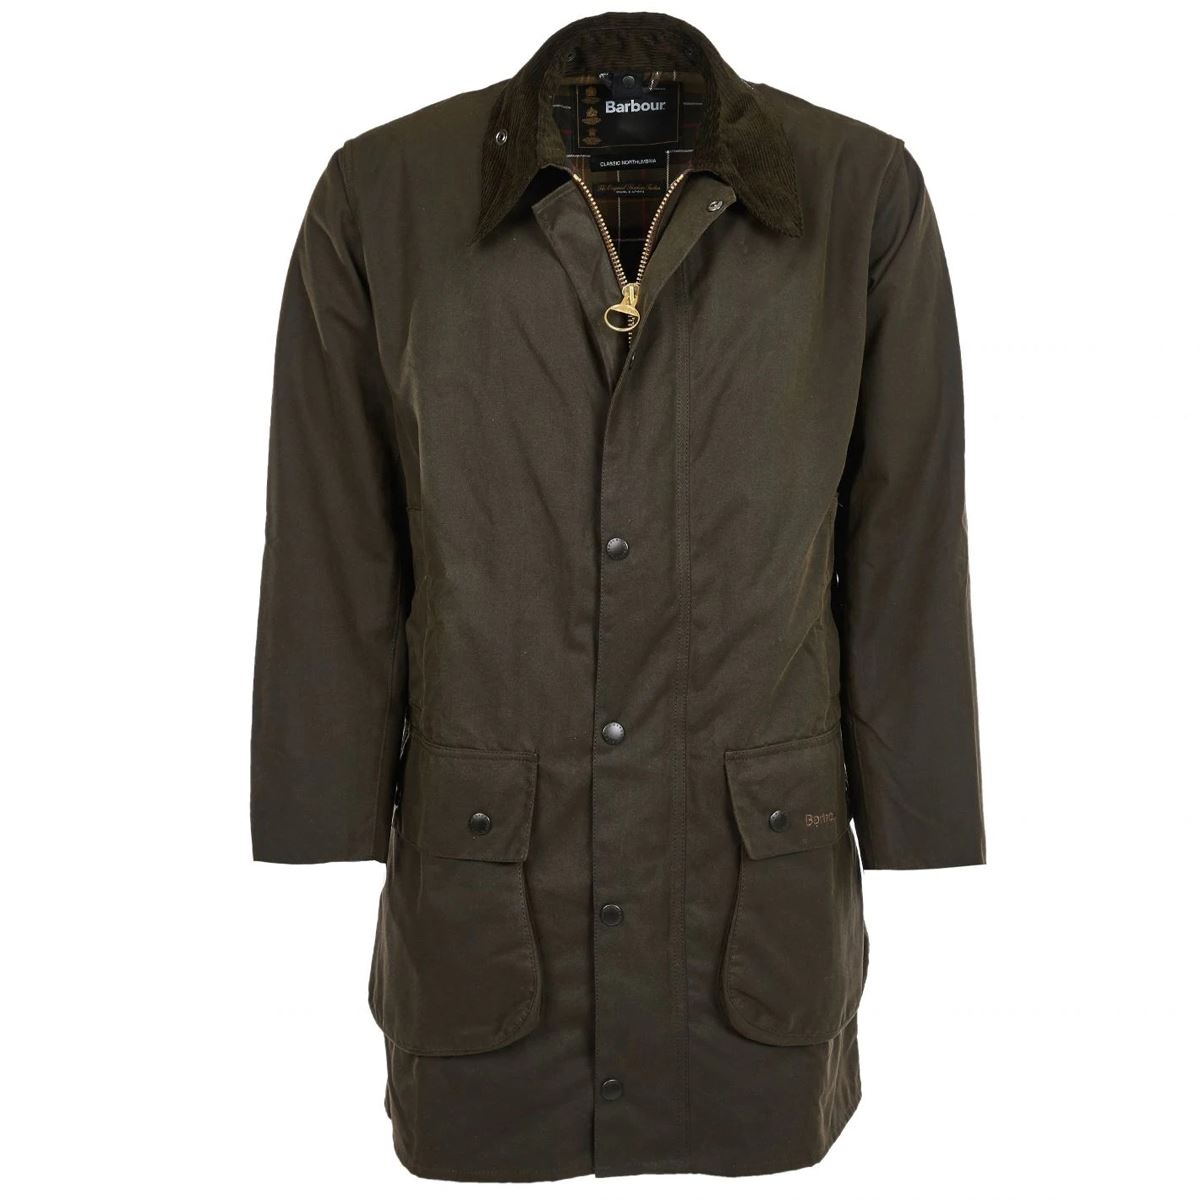 What makes the Barbour Northumbria Wax Jacket a robust coat?